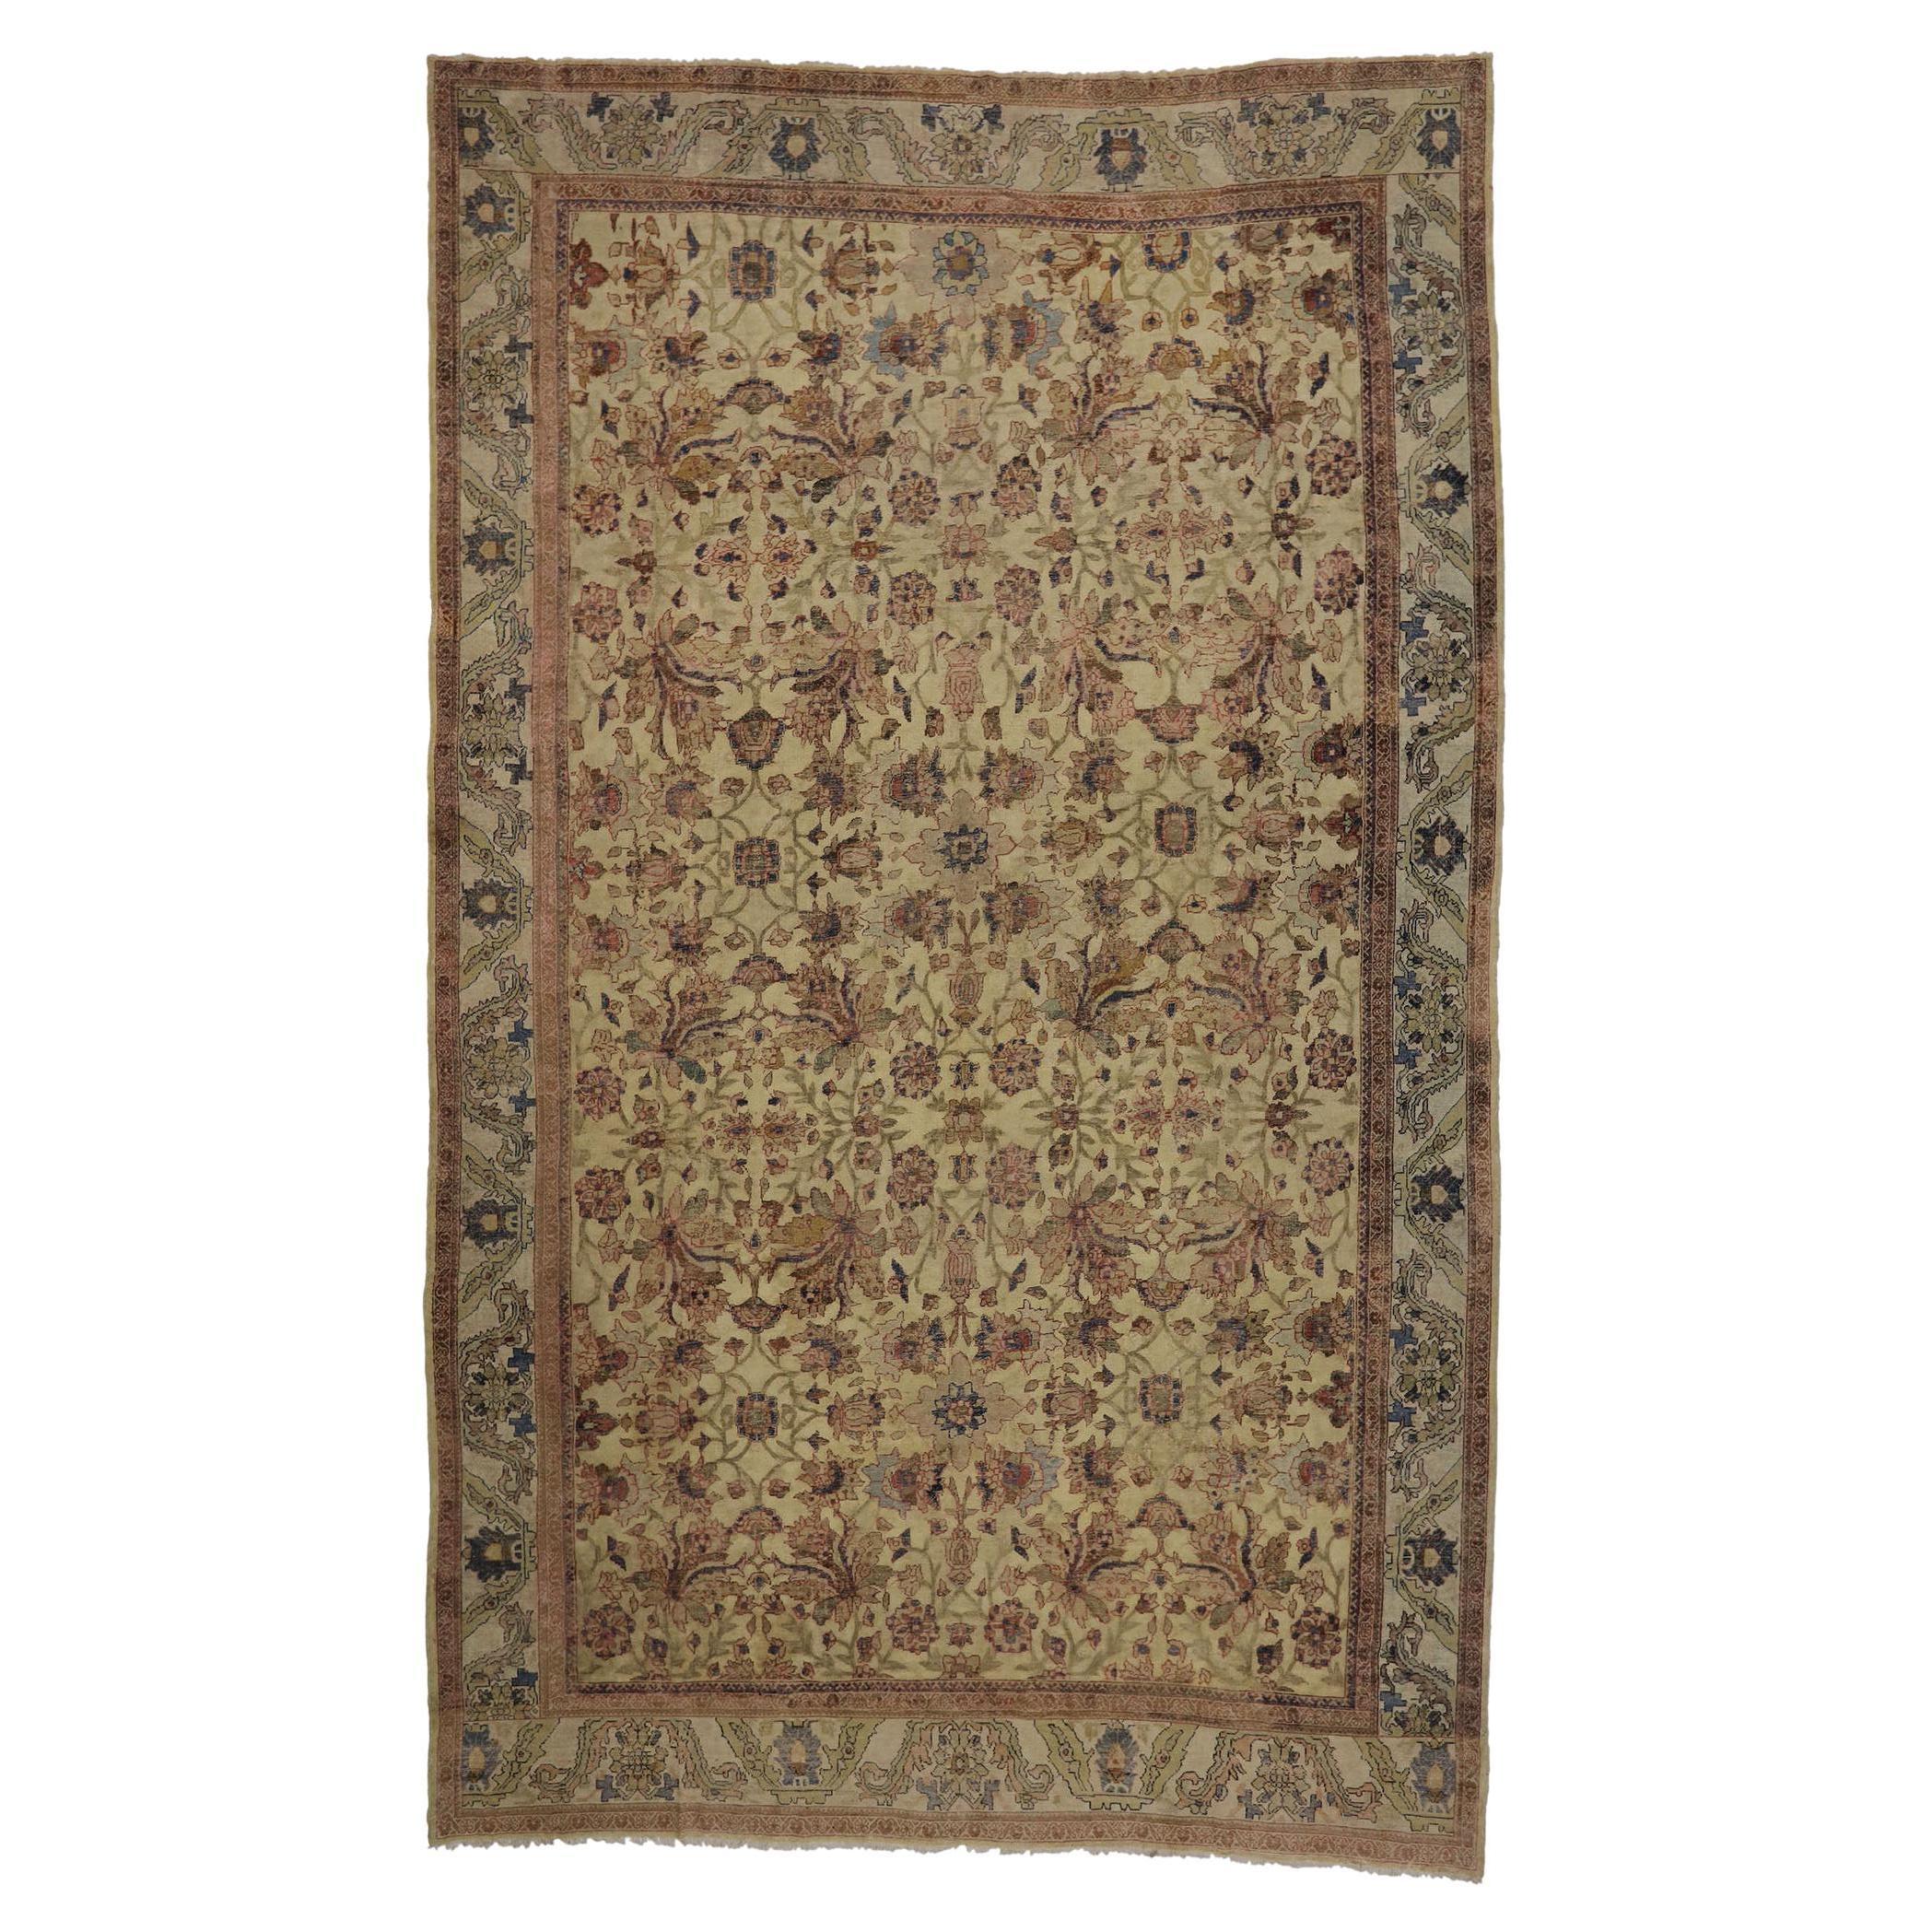 Late 19th Century Antique Persian Sultanabad Rug